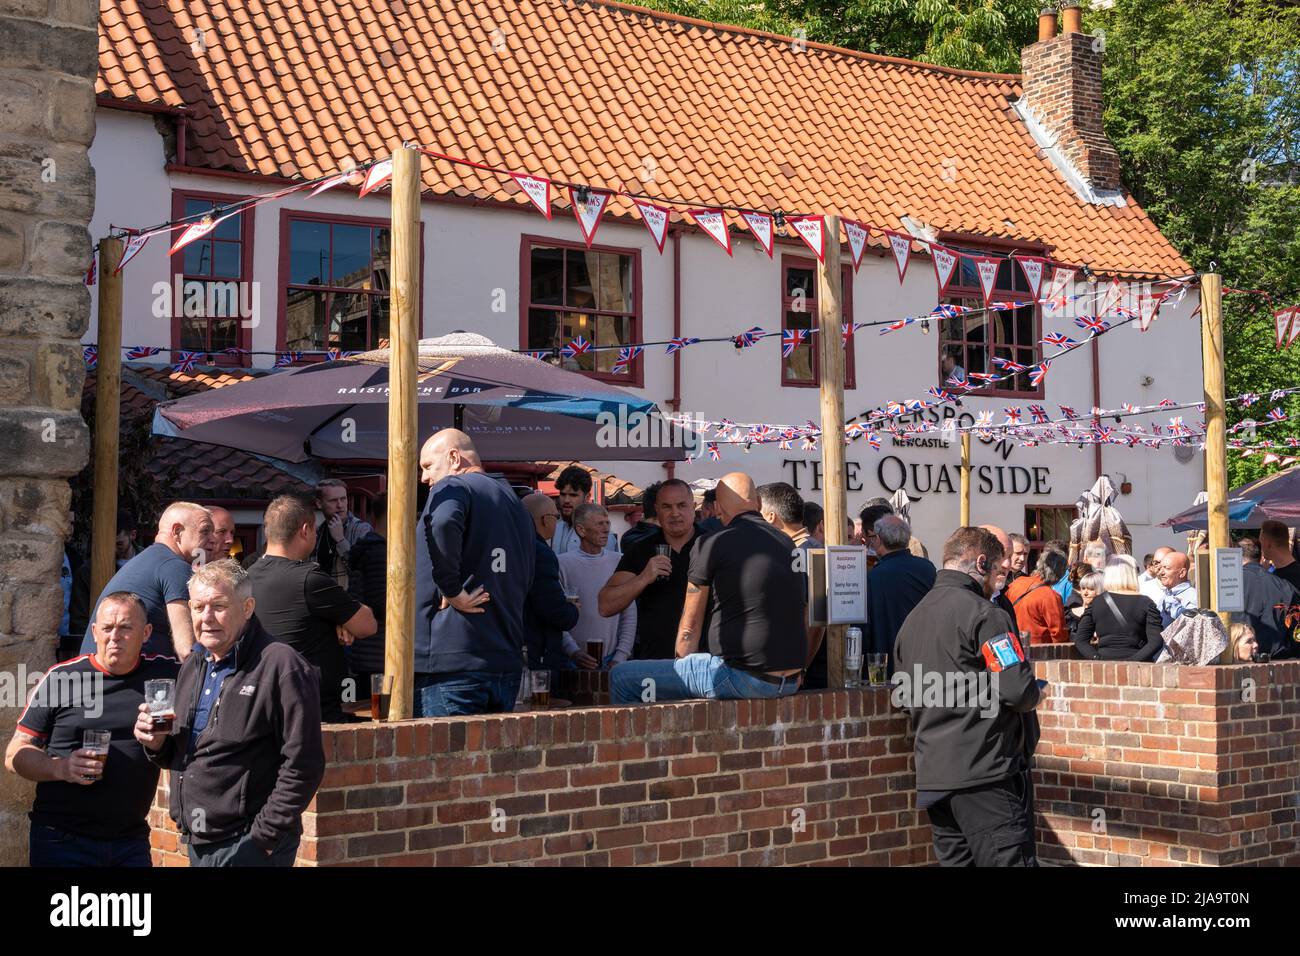 The traditional pub exterior and people drinking outside of the Wetherspoons Quayside Bar on a sunny day in Newcastle upon Tyne, UK. Stock Photo